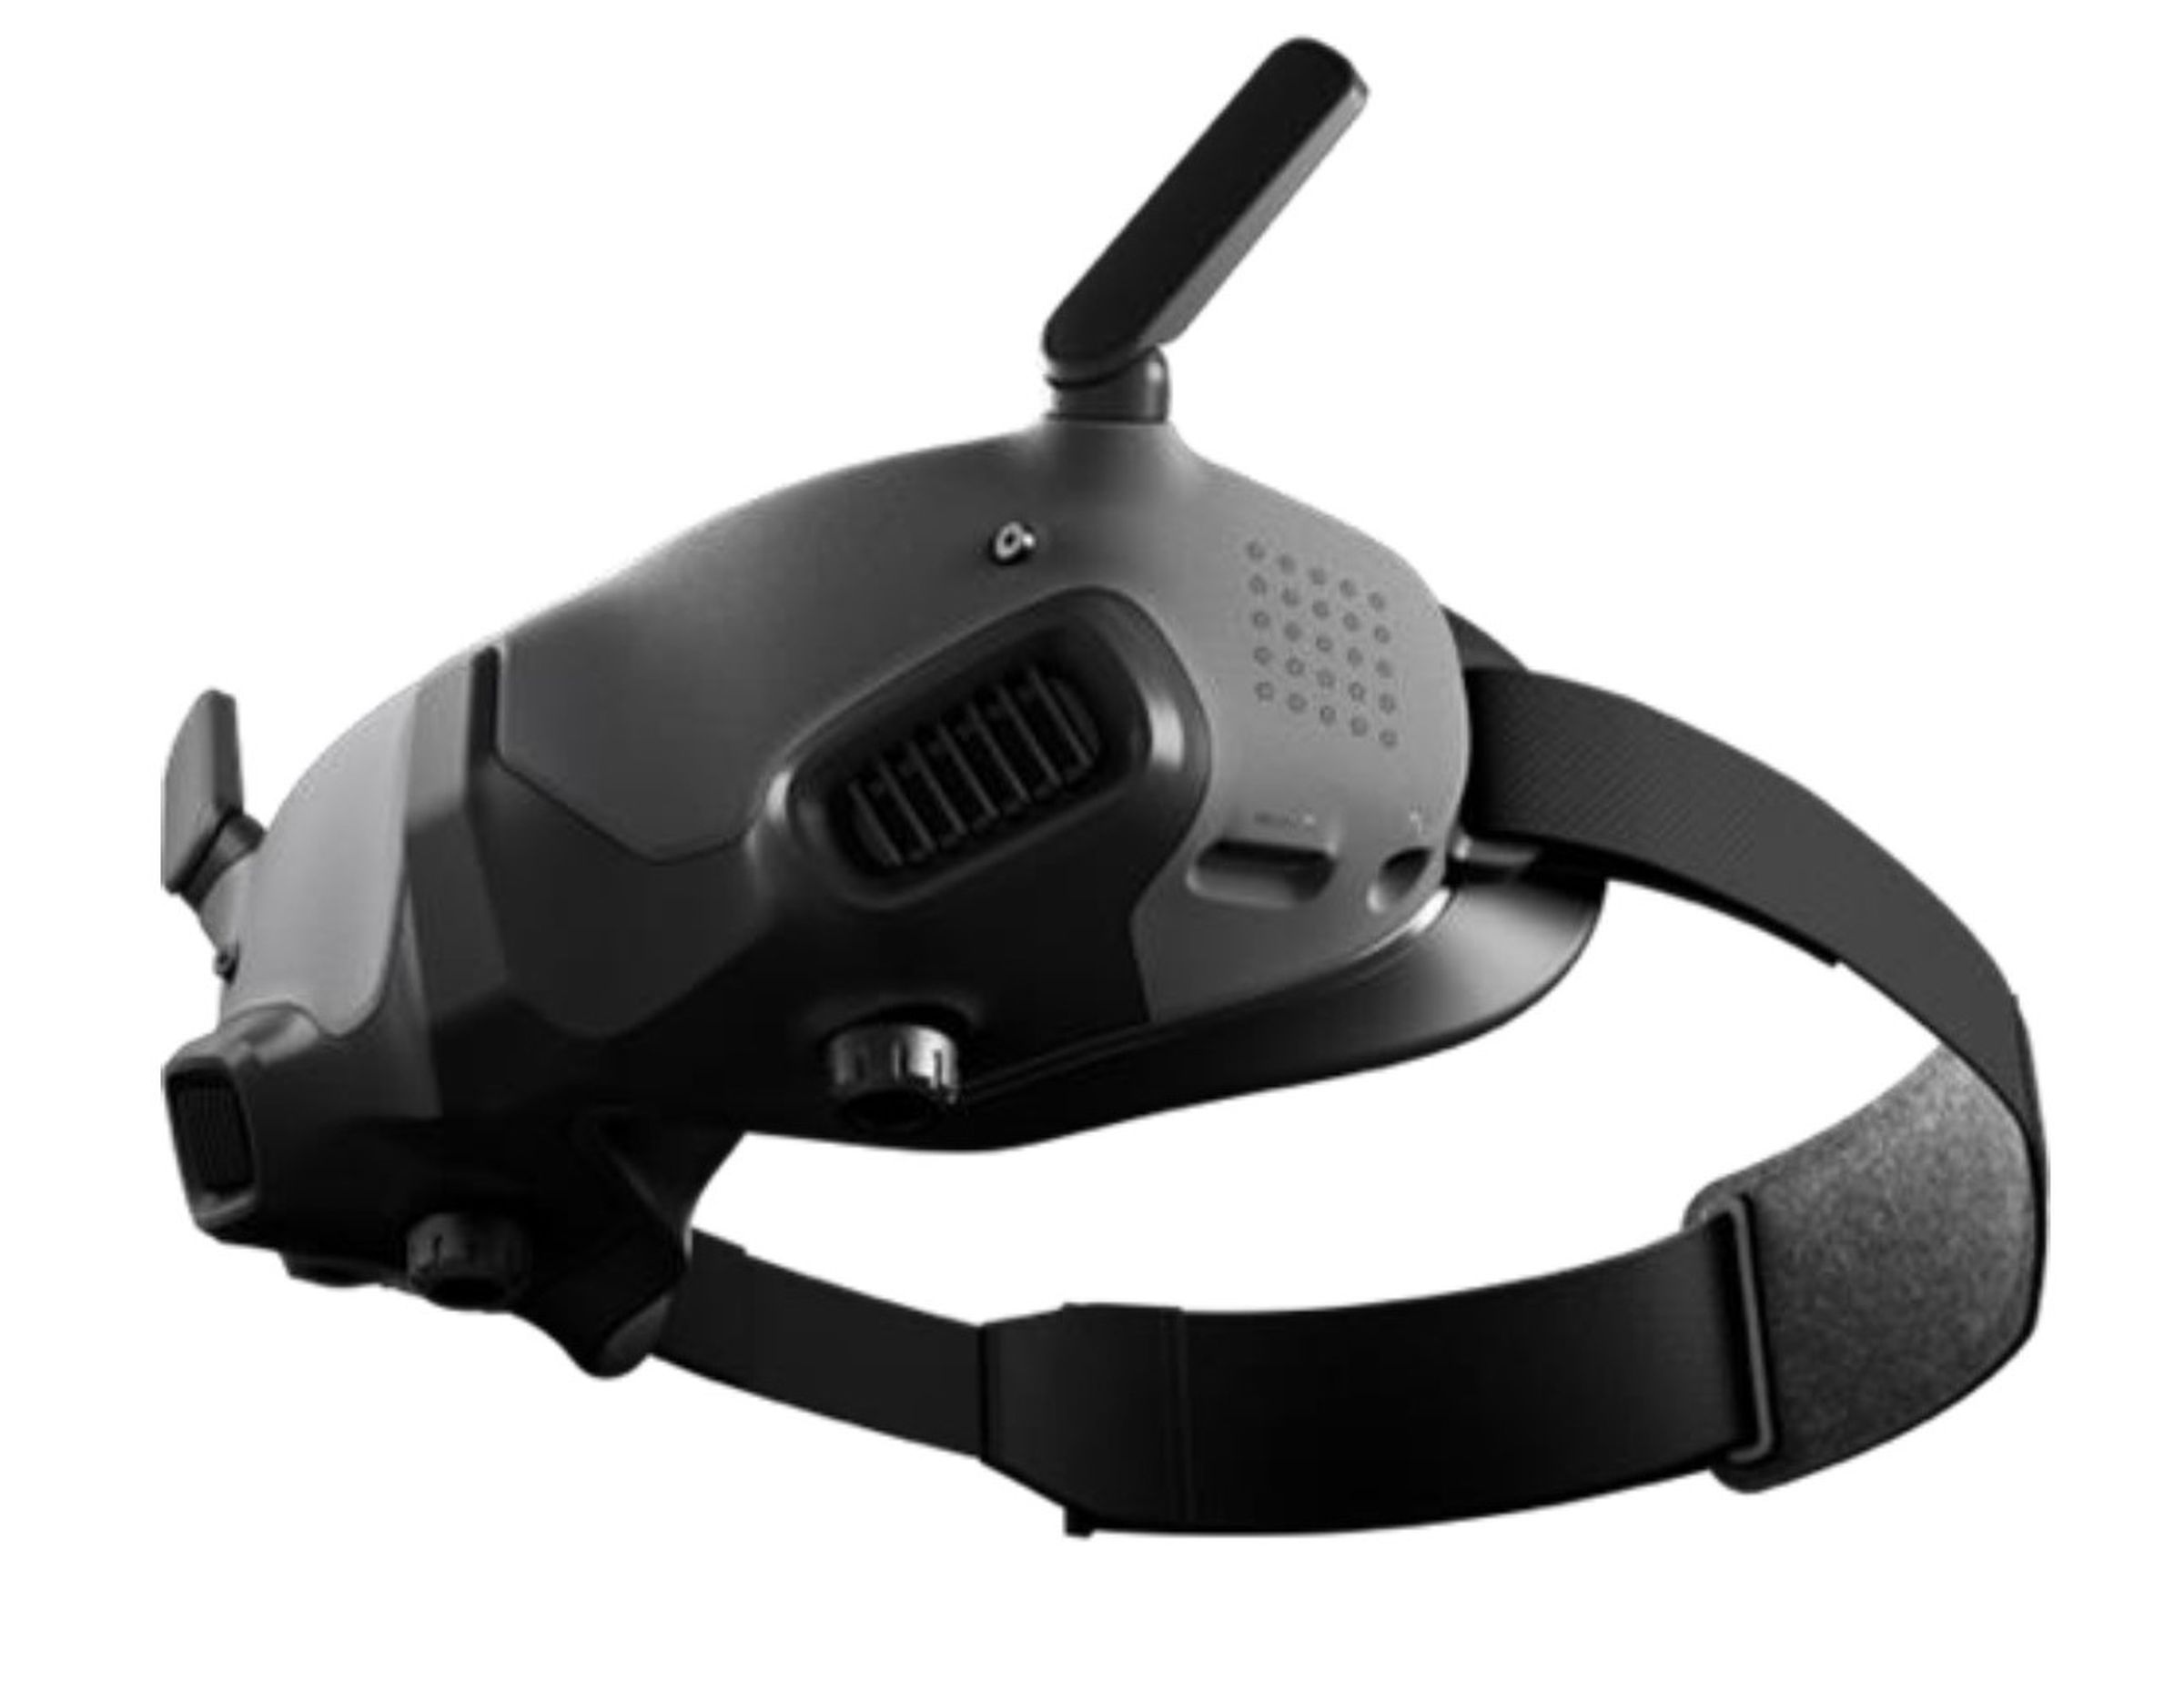 A picture of the DJI Goggles 2 headset from the side against a white background